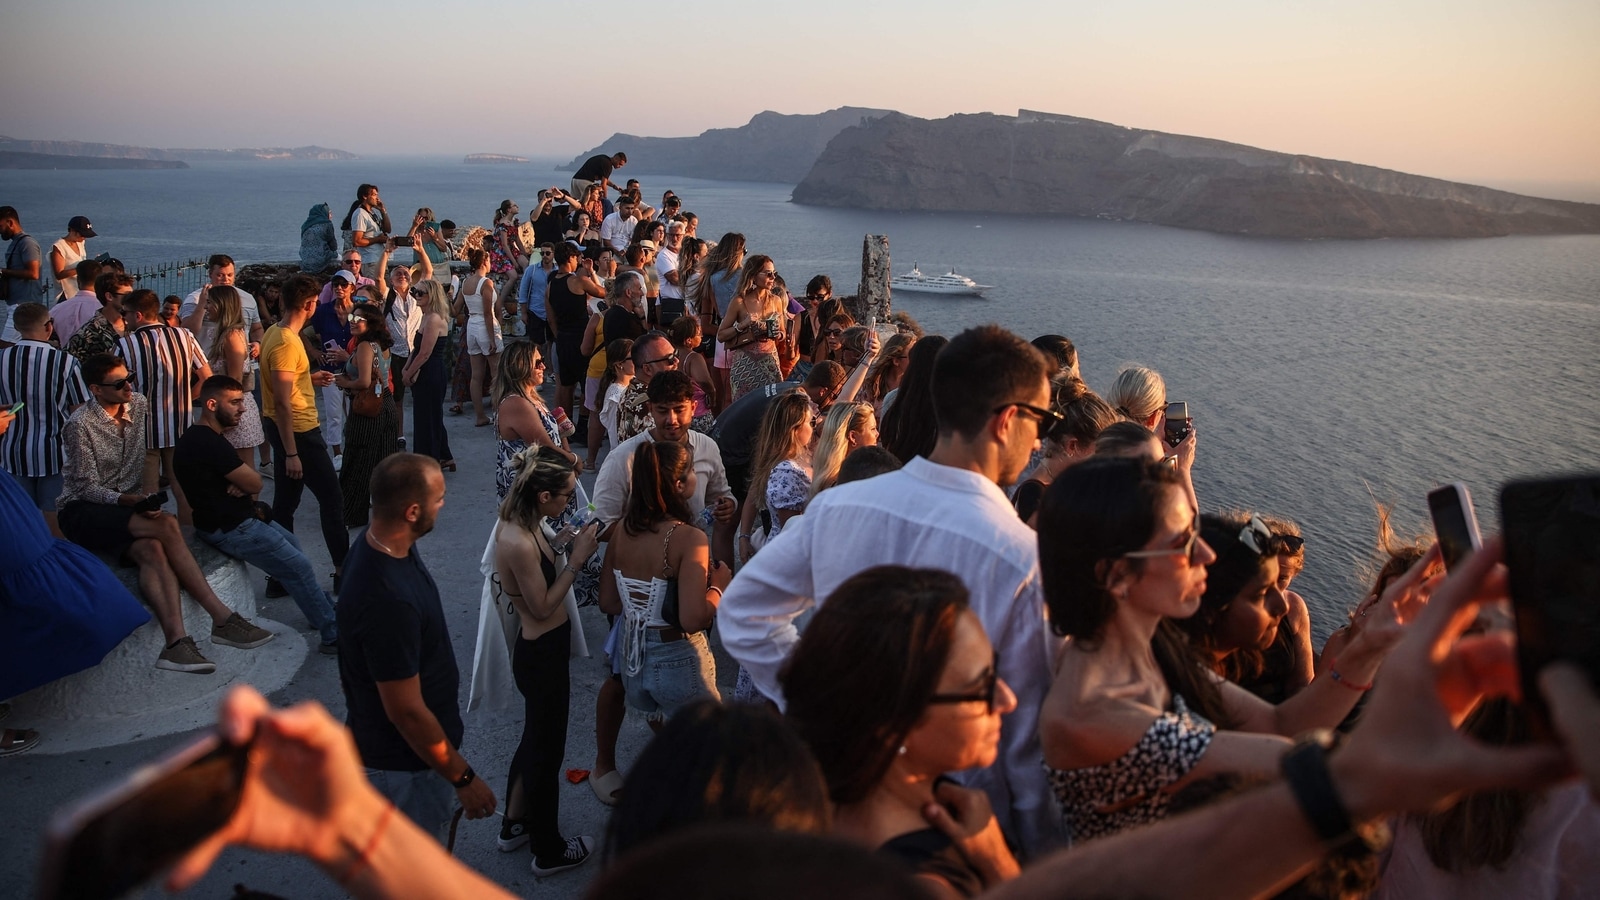 Balancing attractiveness and tourism: Santorini faces the problem of managing record-breaking customer numbers | Walk newsfragment